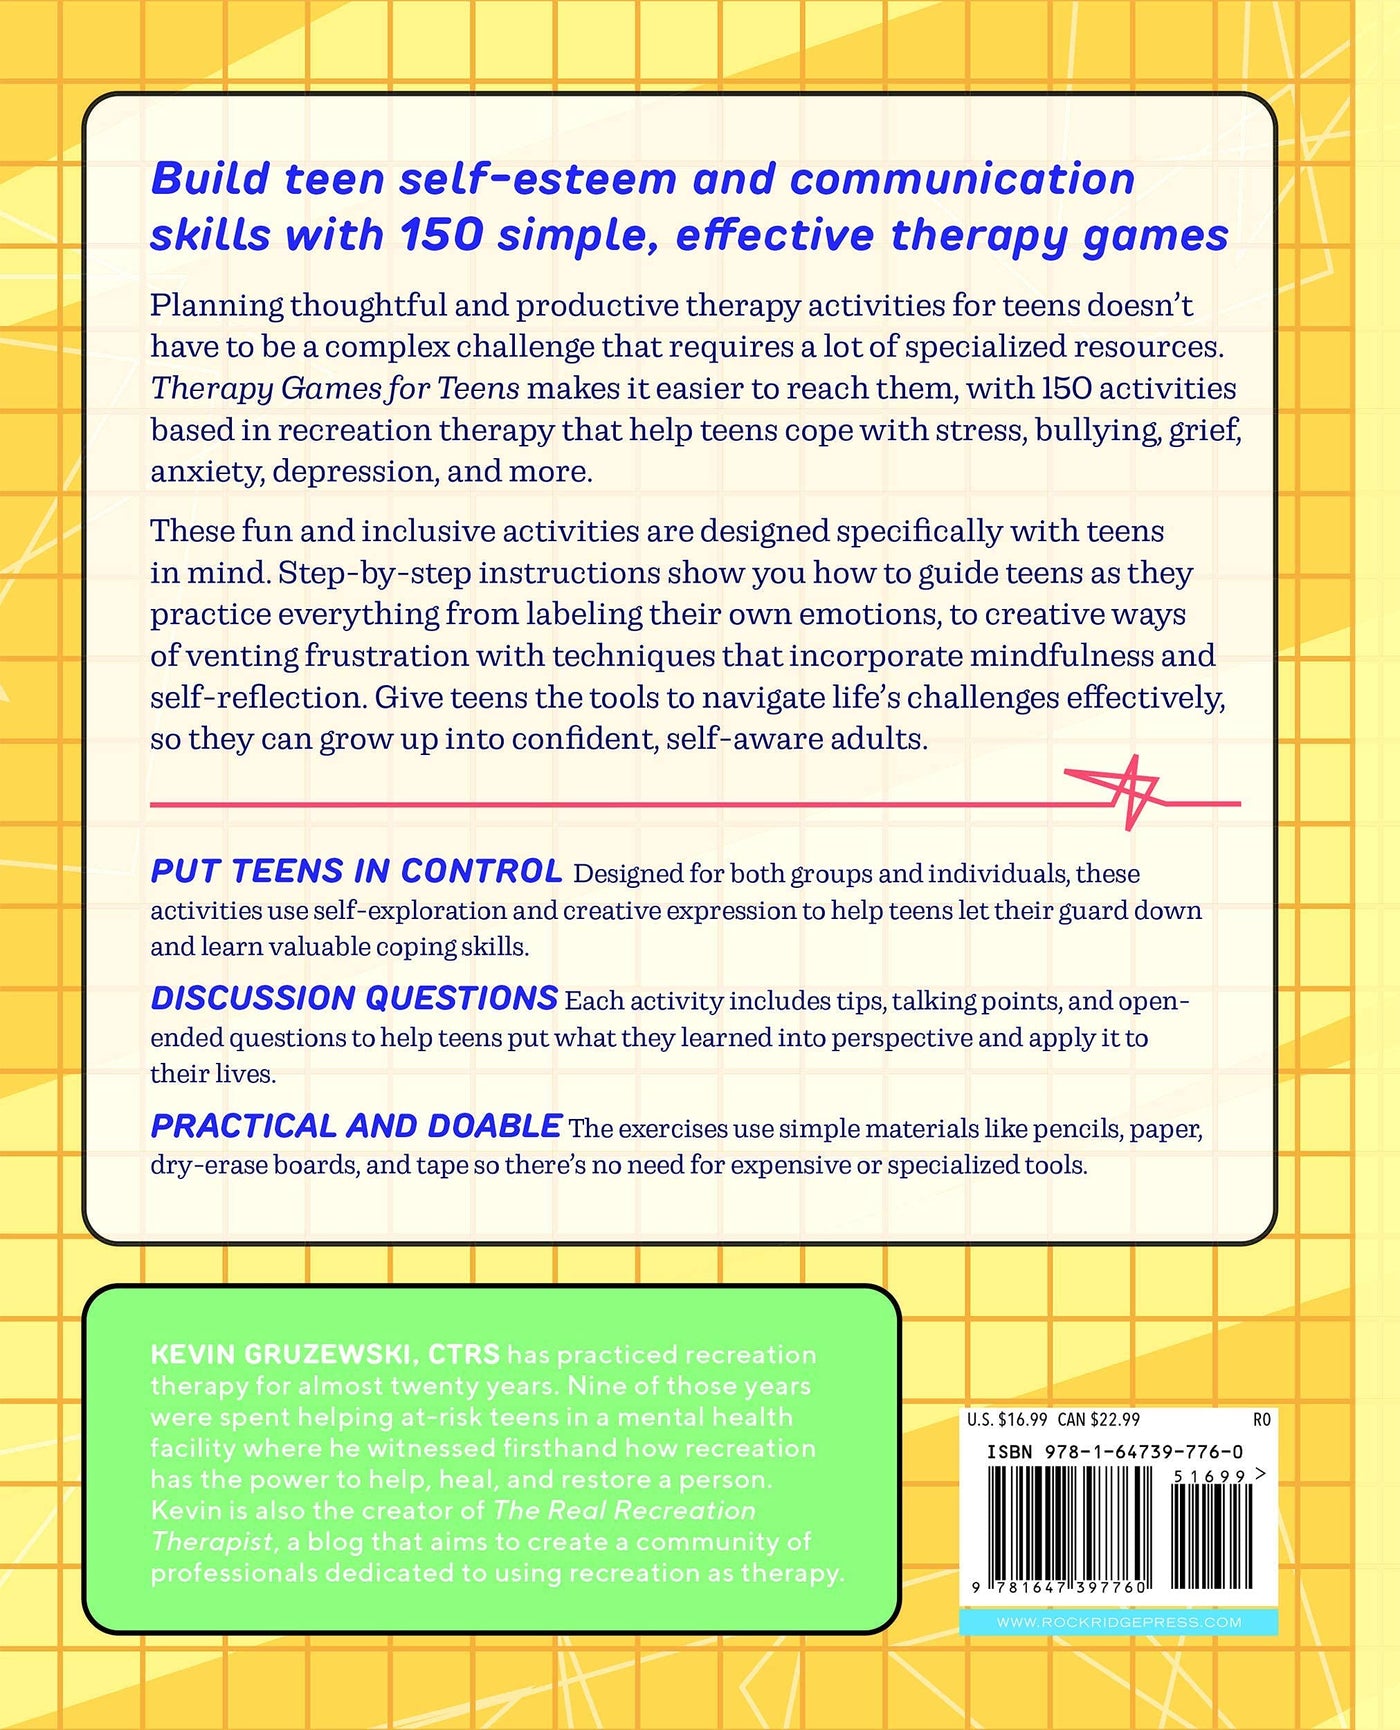 Therapy Games for Teens: 150 Activities to Improve Self-Esteem, Communication, and Coping Skills (Spiral Bound)